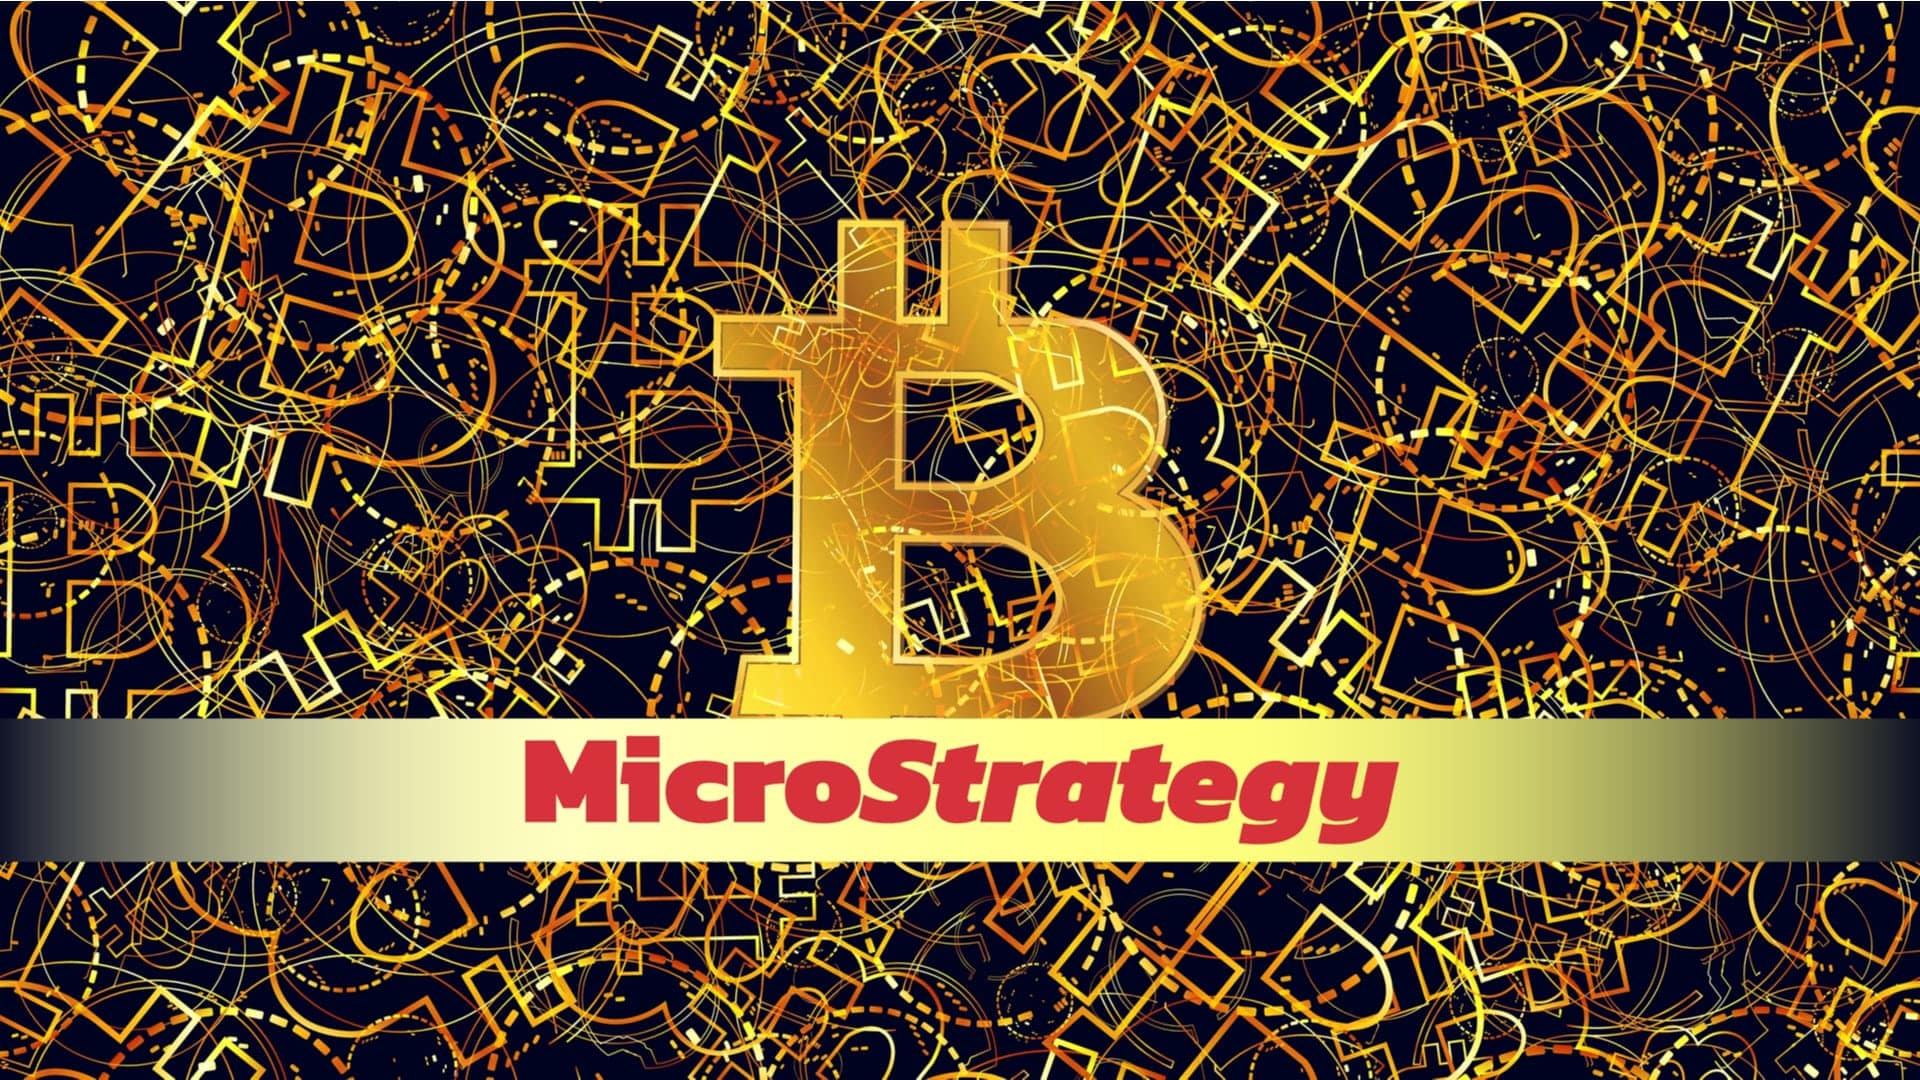 MicroStrategy is offering $500 million in convertible senior notes to buy more bitcoins